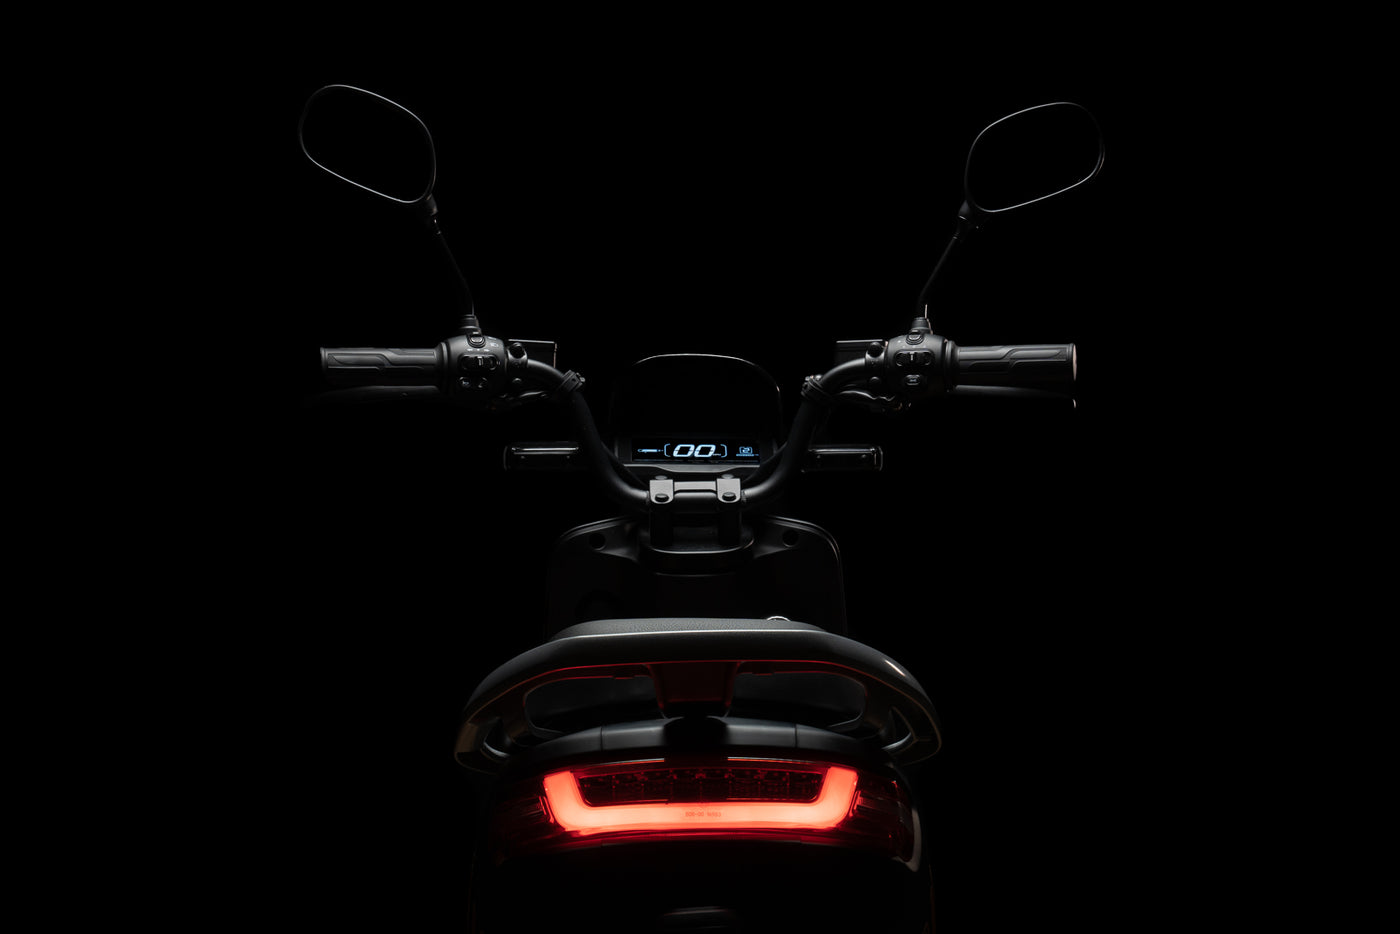 Black Bilis Electric Moped on black background with red LED lights